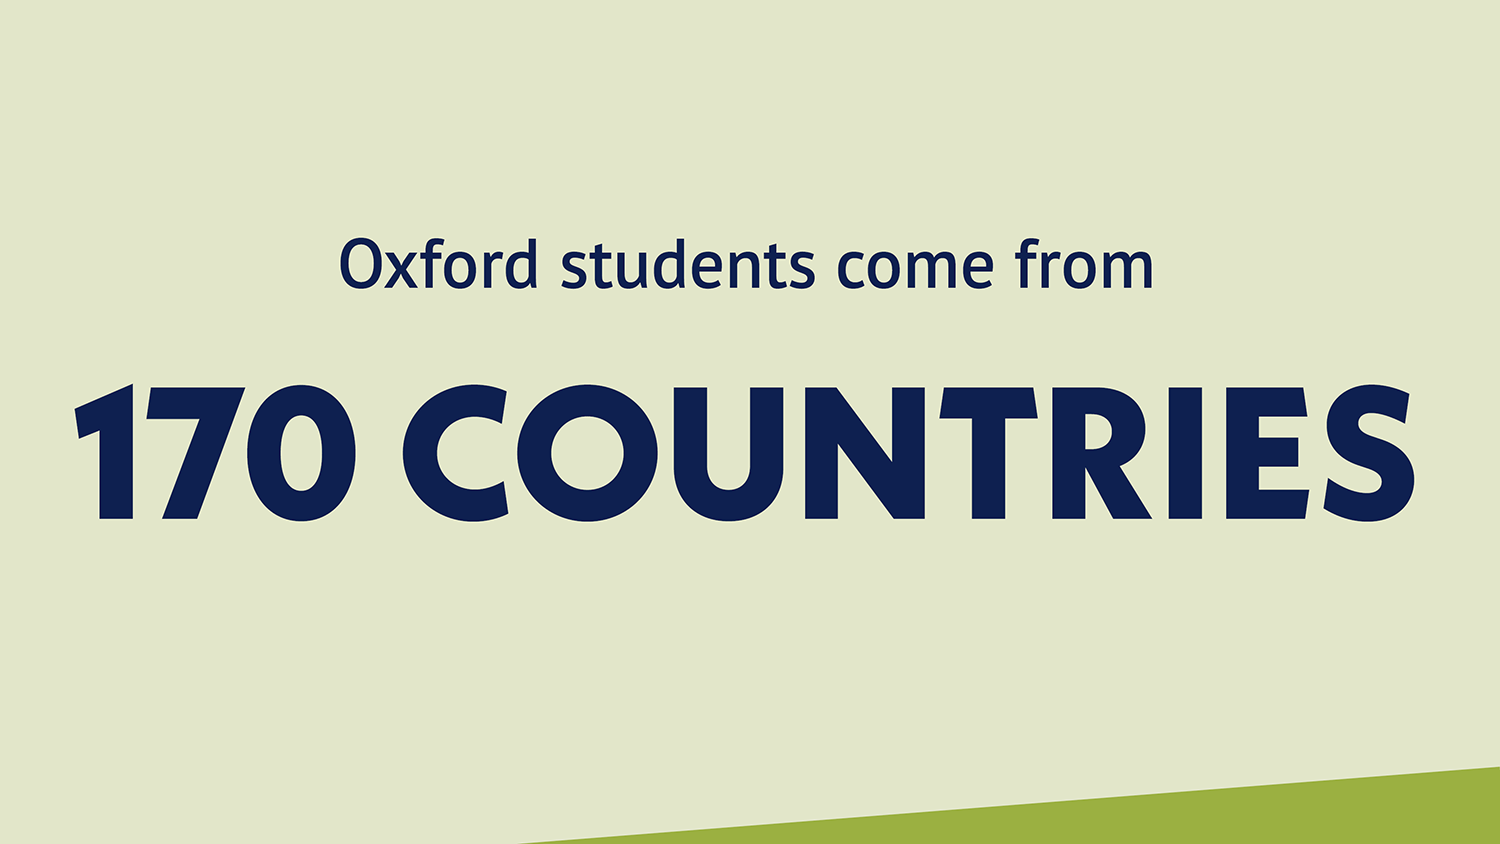 Oxford students come from 170 countries